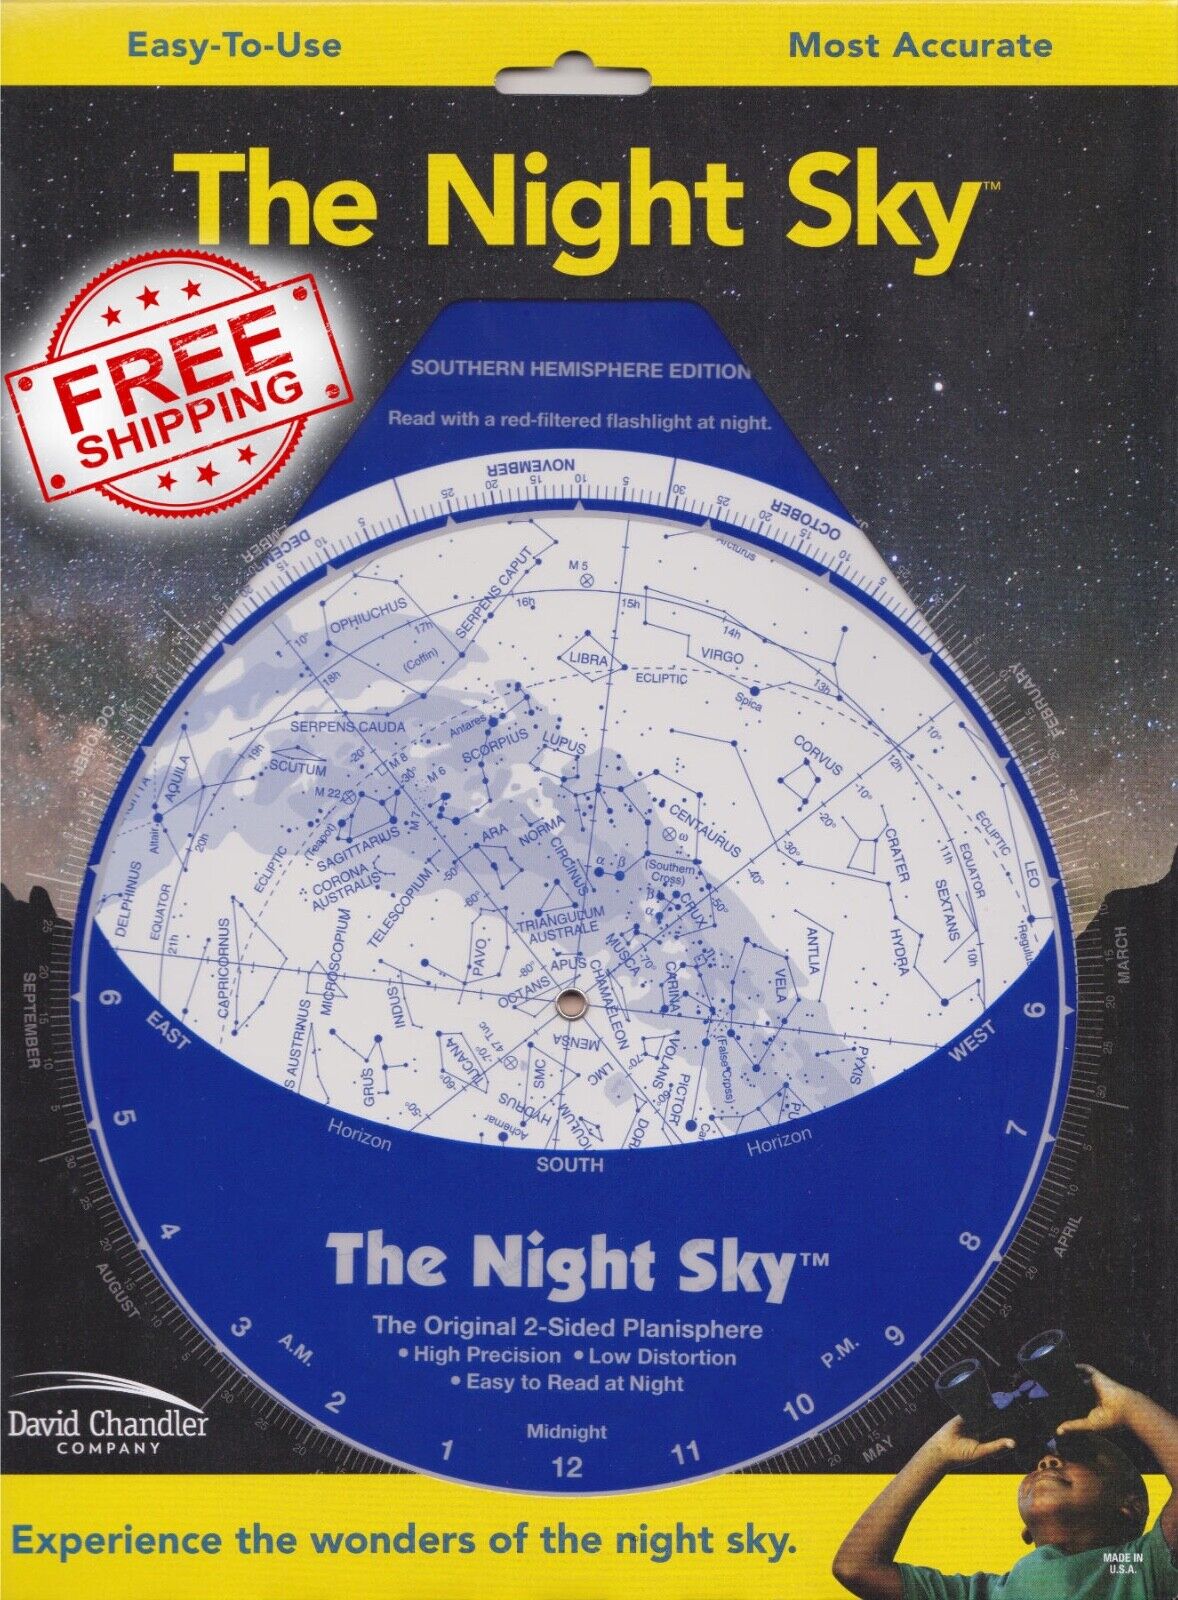 The Night Sky Planisphere for the Southern Hemisphere by David Chandler Sky Map